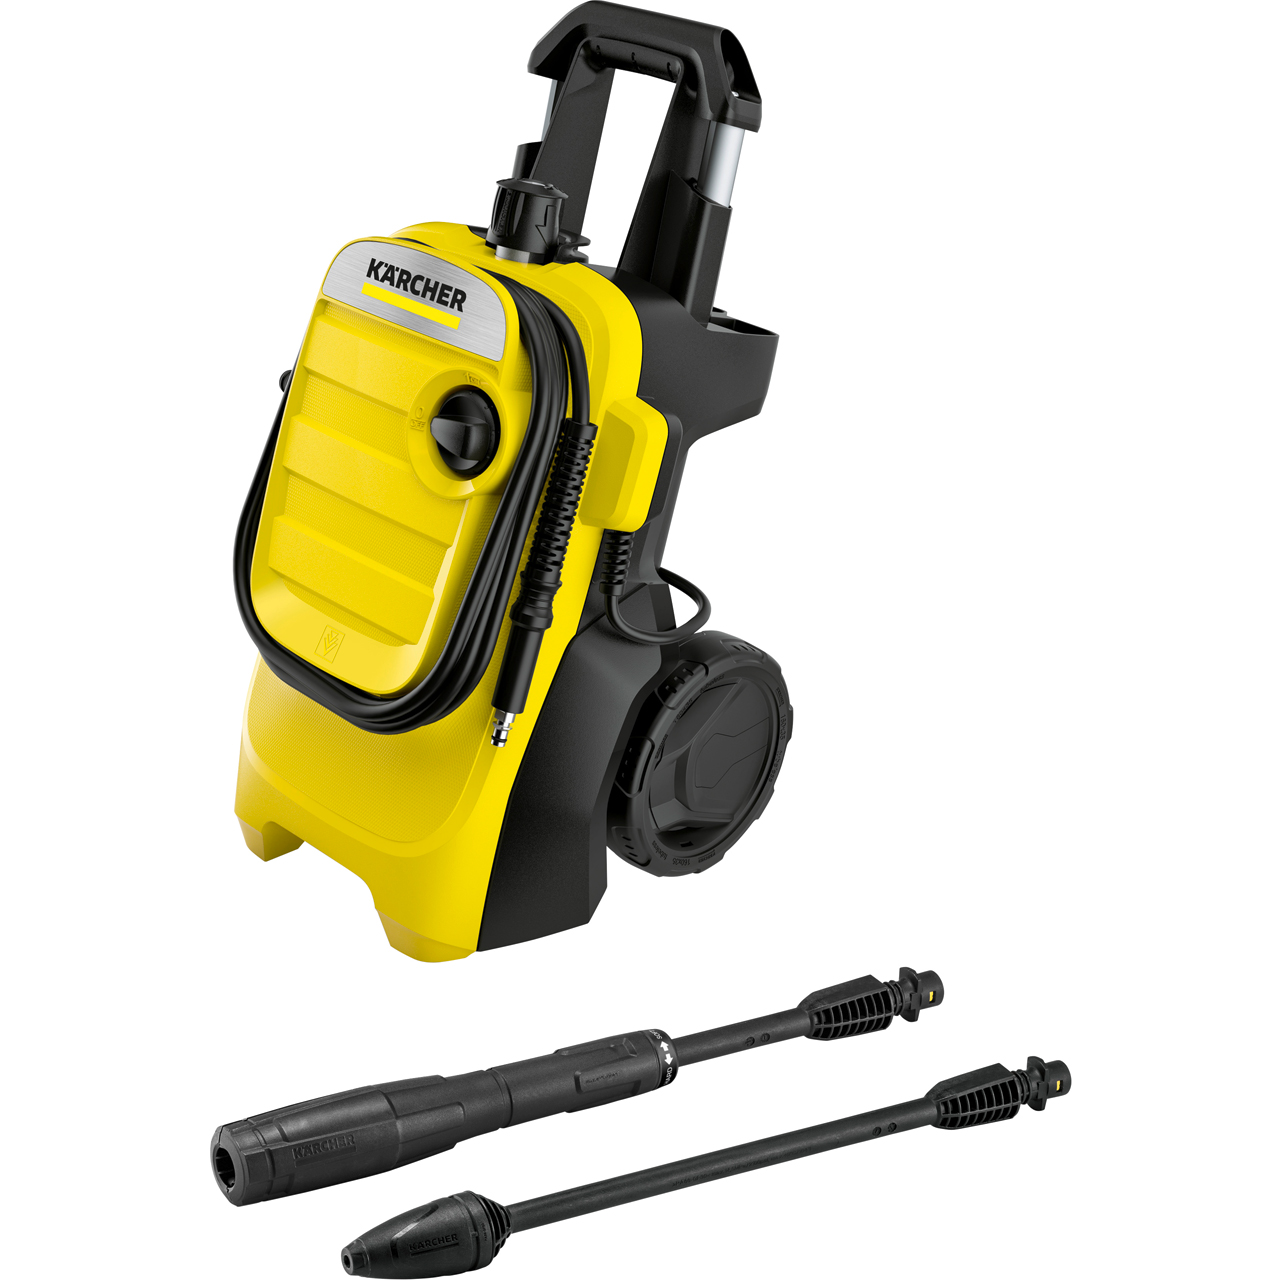 Karcher K4 Compact Pressure Washer Review